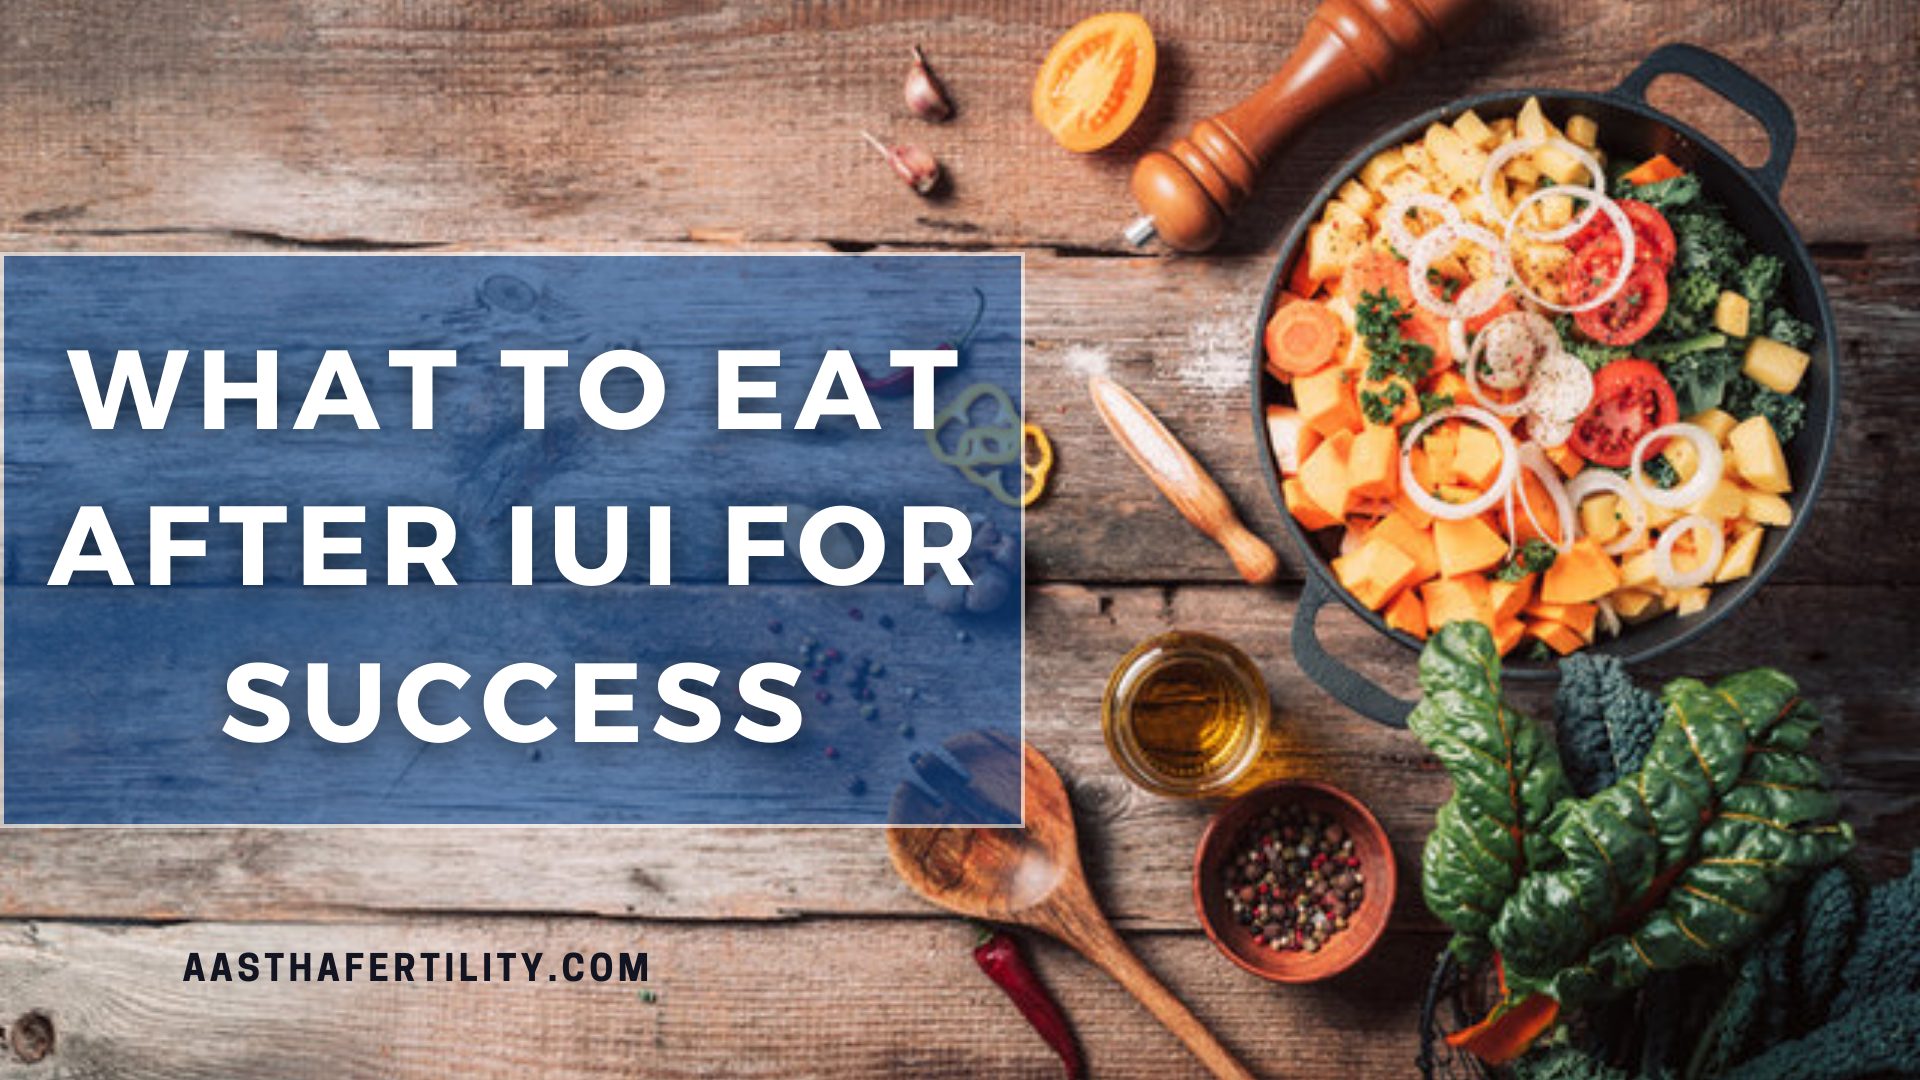 What to Eat after IUI for Success :About IUI & Implantation